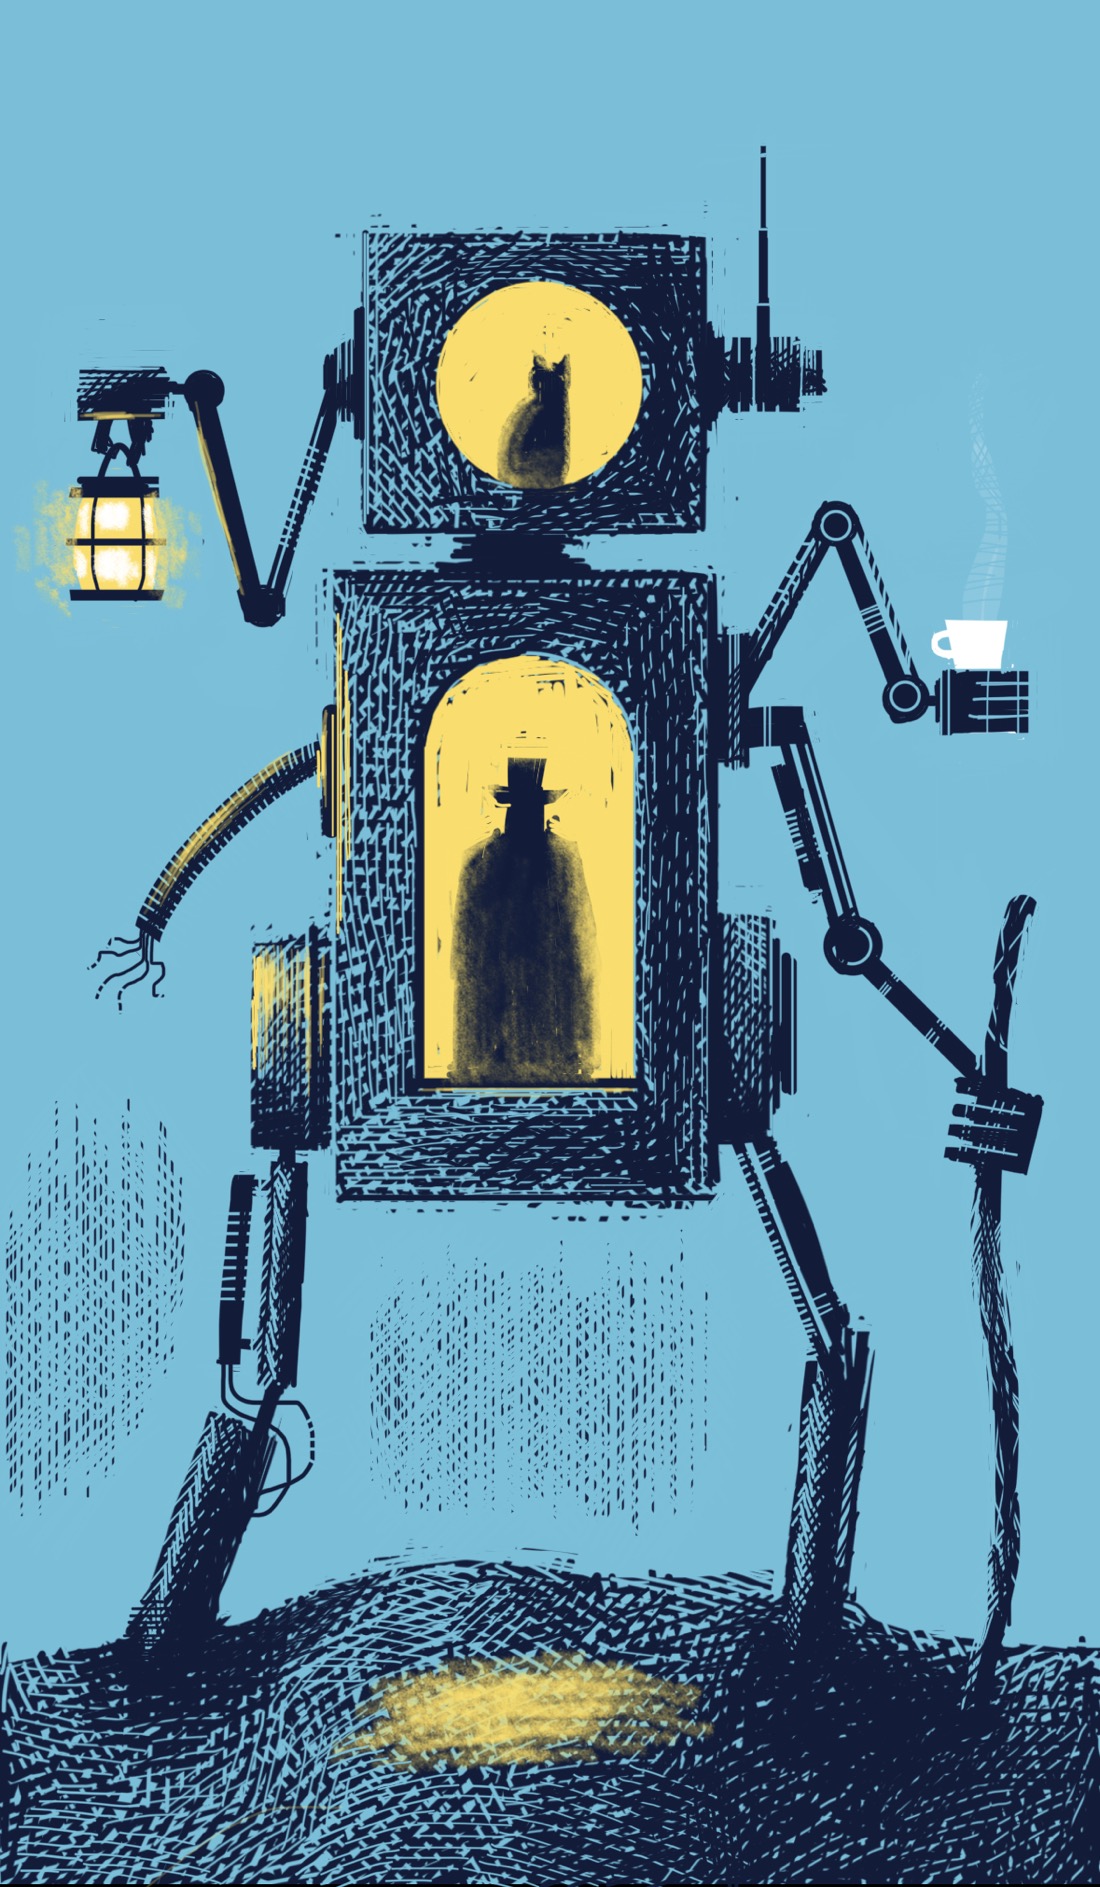 A robotic humanoid contraption comprised of a boxy head, with a round window where the face would be, and a boxy torso with a tall window in the middle. A cat sits in the top window; a person with a top hat is silhouetted in the lower one. The robot has multiple arms, one of which holds a lantern and another of which holds a coffee cup and hiking stick.